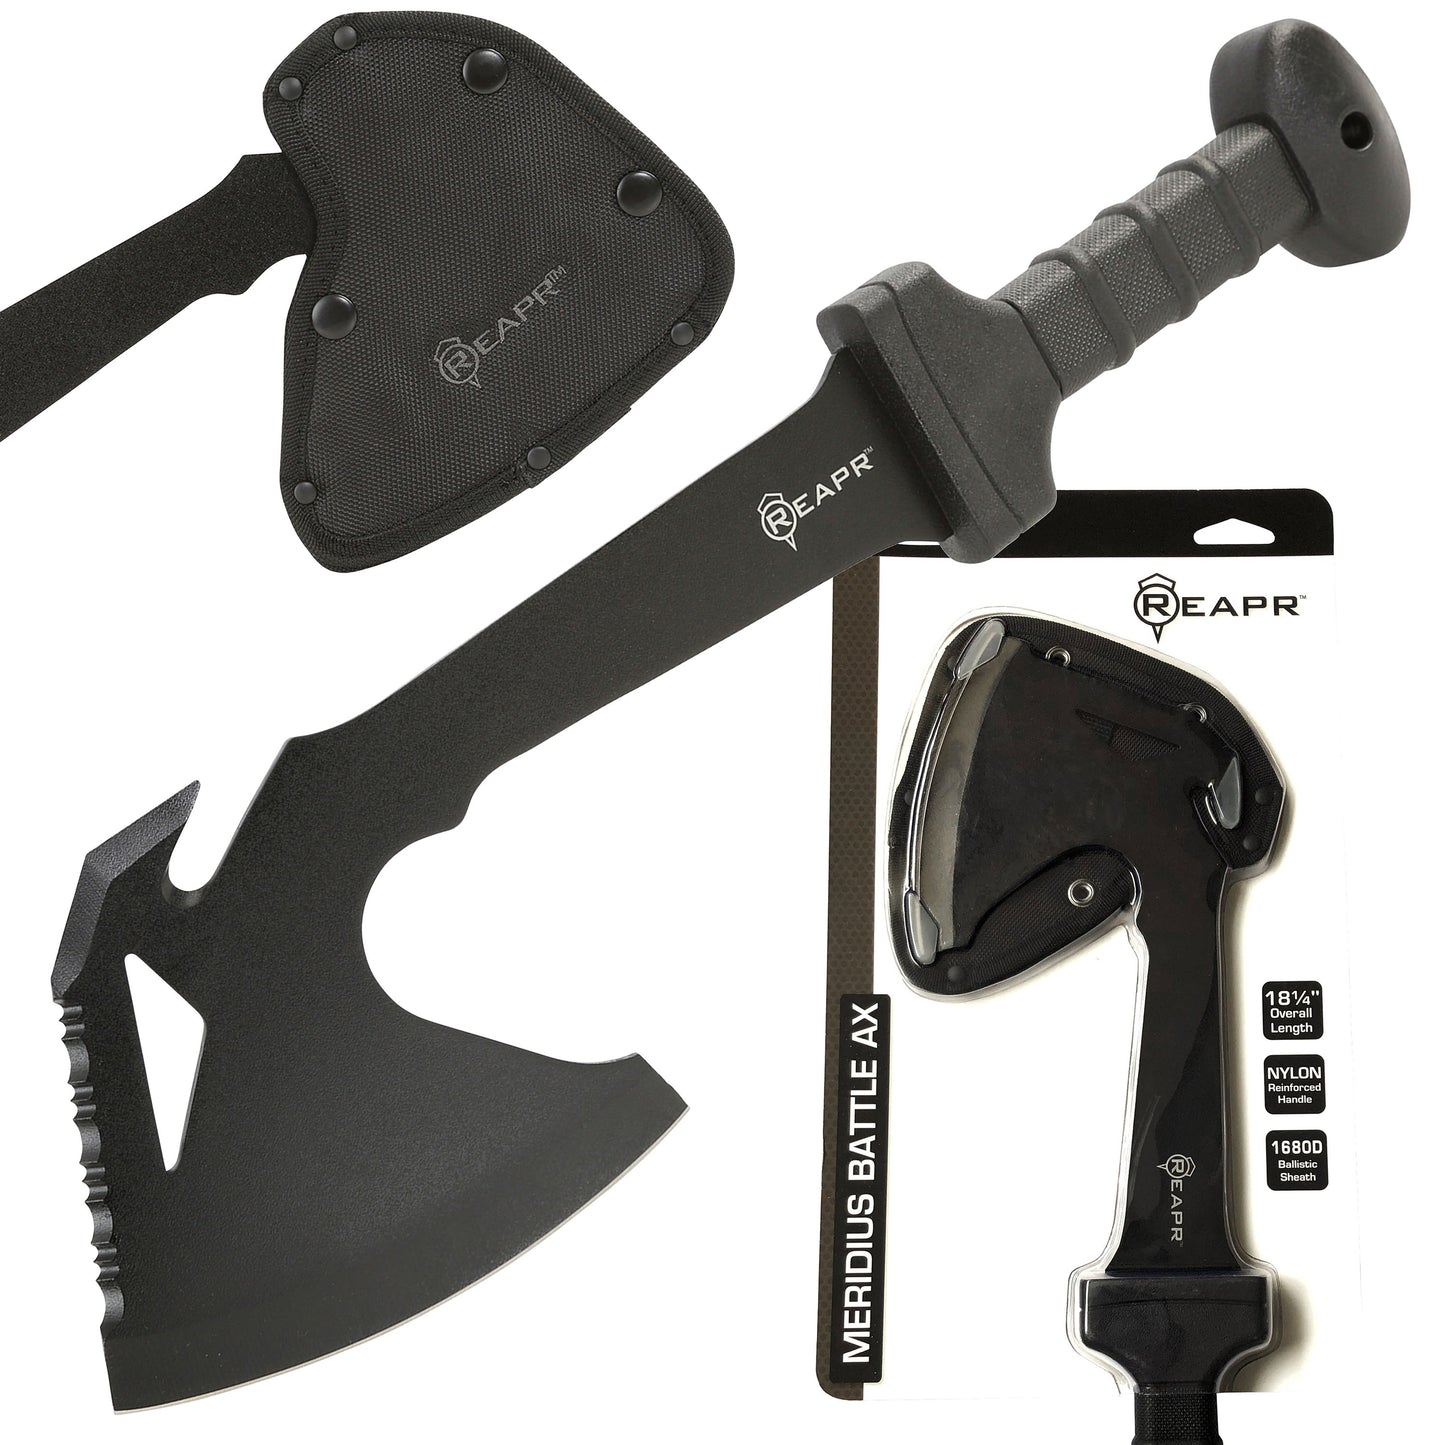 REAPR 11020 Meridius metal battle axe for chopping branches, ripping cloth or fabric, light sawing, and outdoor camping.